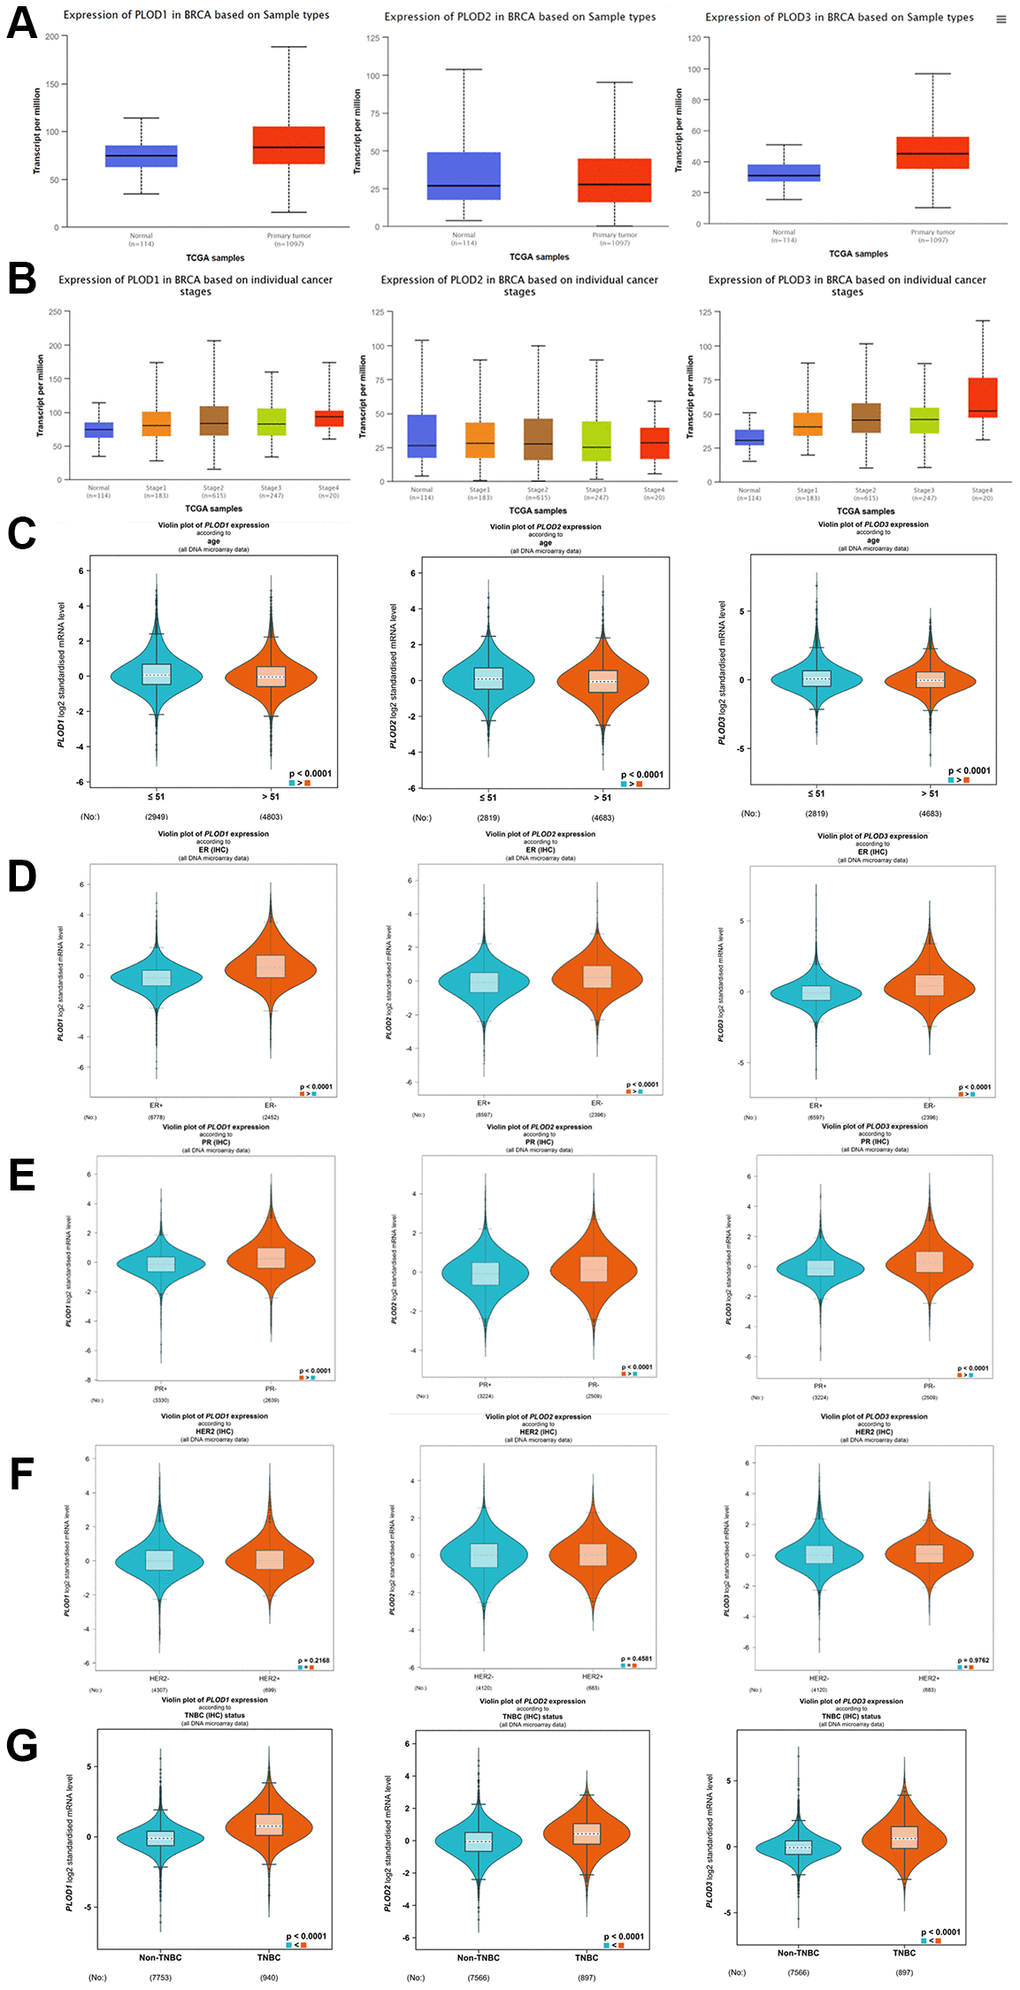 The expression of PLOD family genes in breast cancer using UALCAN database. (A) The expression of PLOD1, PLOD2 and PLOD3 in breast cancer tissues and normal tissues; (B) The expression of PLOD1, PLOD2 and PLOD3 in different clinical stages of breast cancer; bc-GeneExMiner 4.6 analyze the PLOD family genes in different clinical status. (C) Age; (D) ER; (E) PR; (F) Her-2; (G) TNBC.